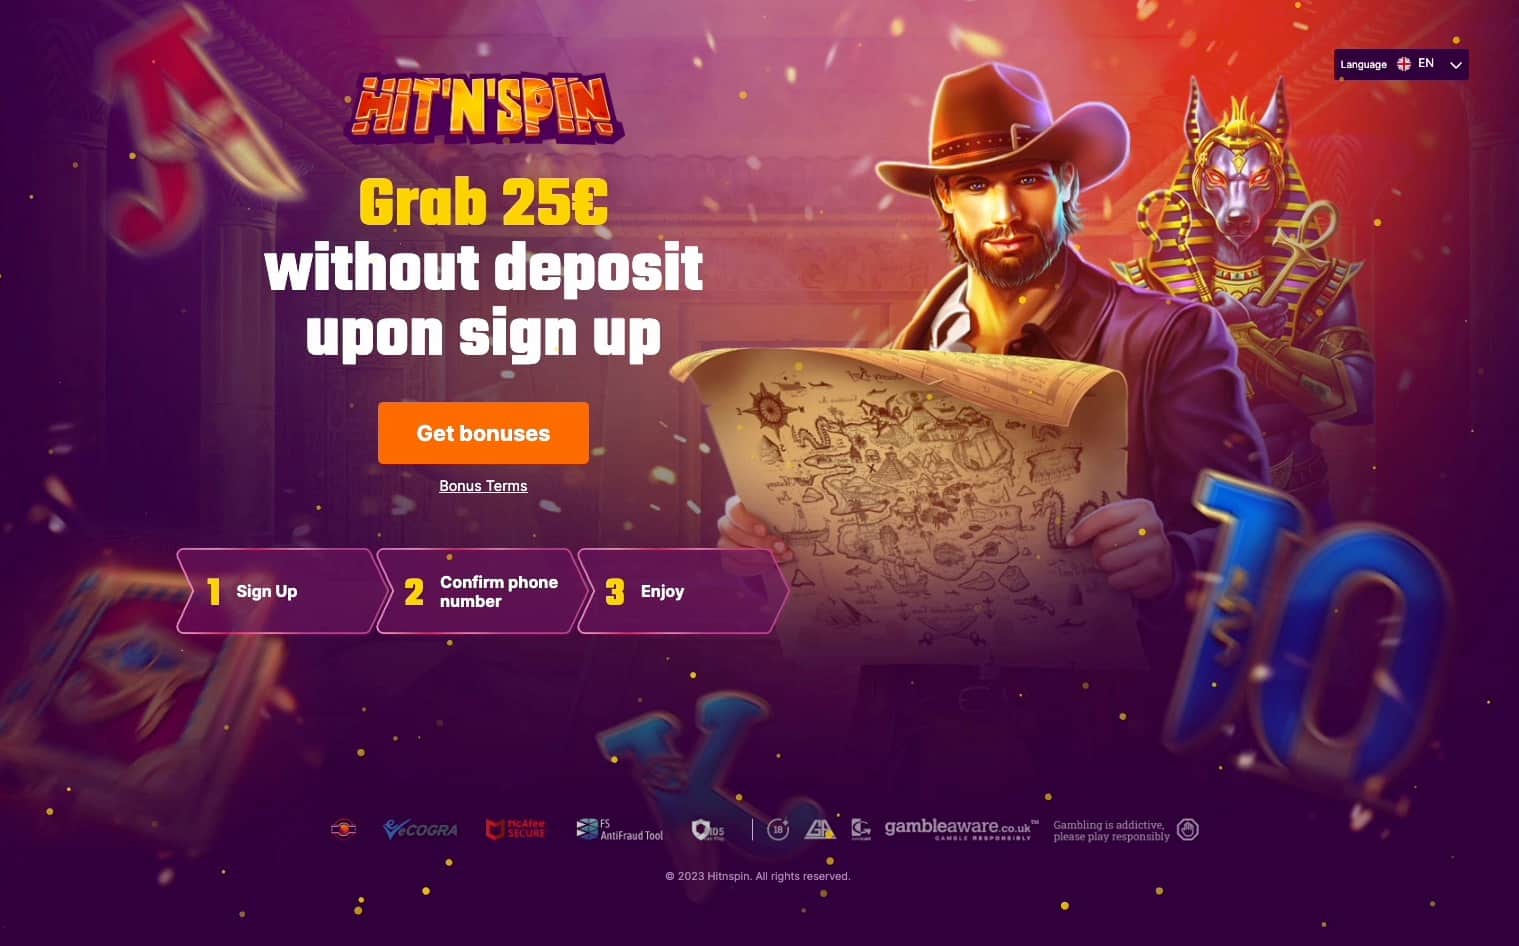 No deposit offer page at Hit n Spin Casino